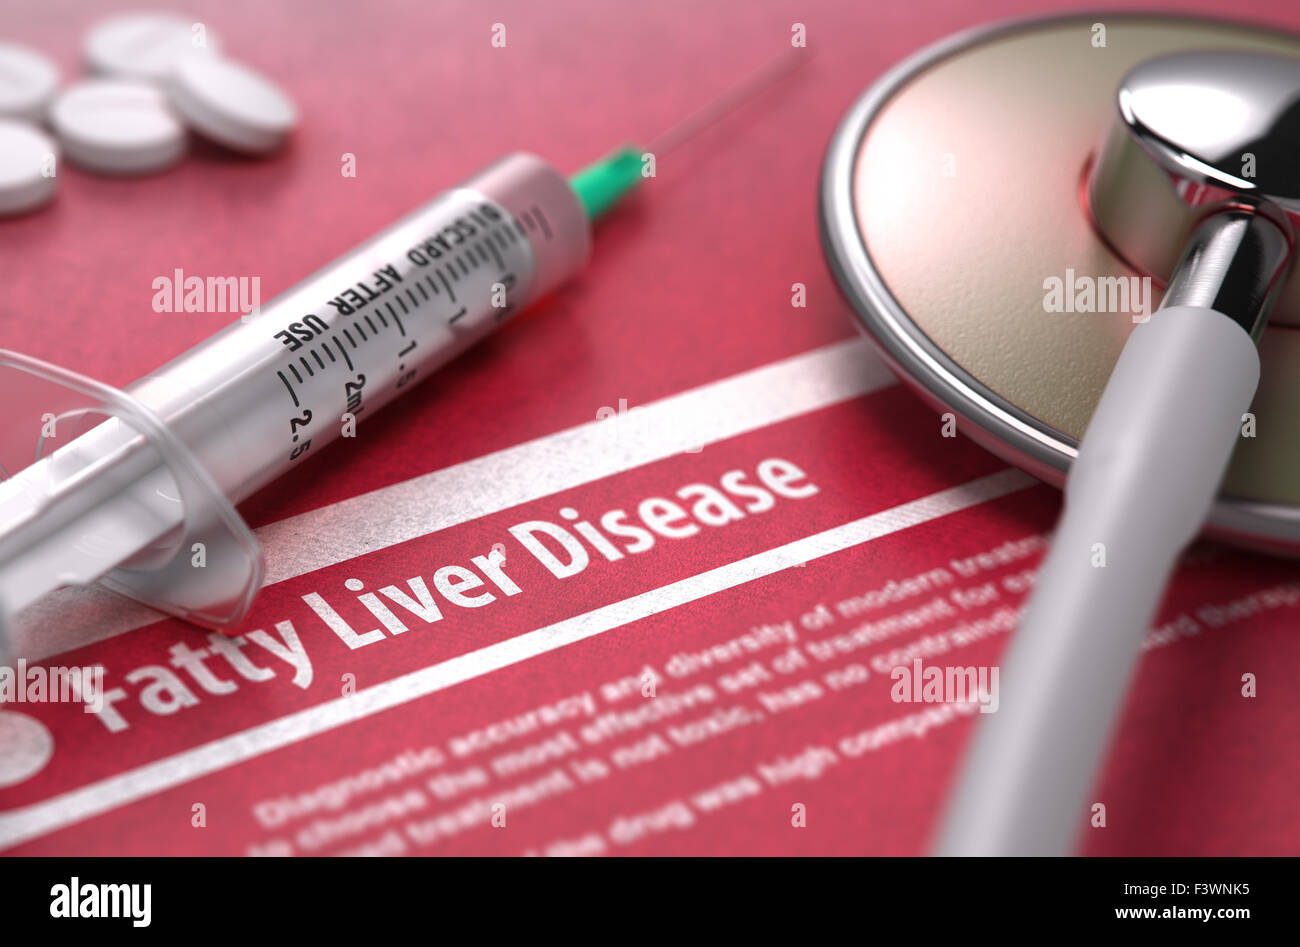 Fatty Liver Disease - Medical Concept on Red Background with Blurred Text and Composition of Pills, Syringe and Stethoscope. Stock Photo